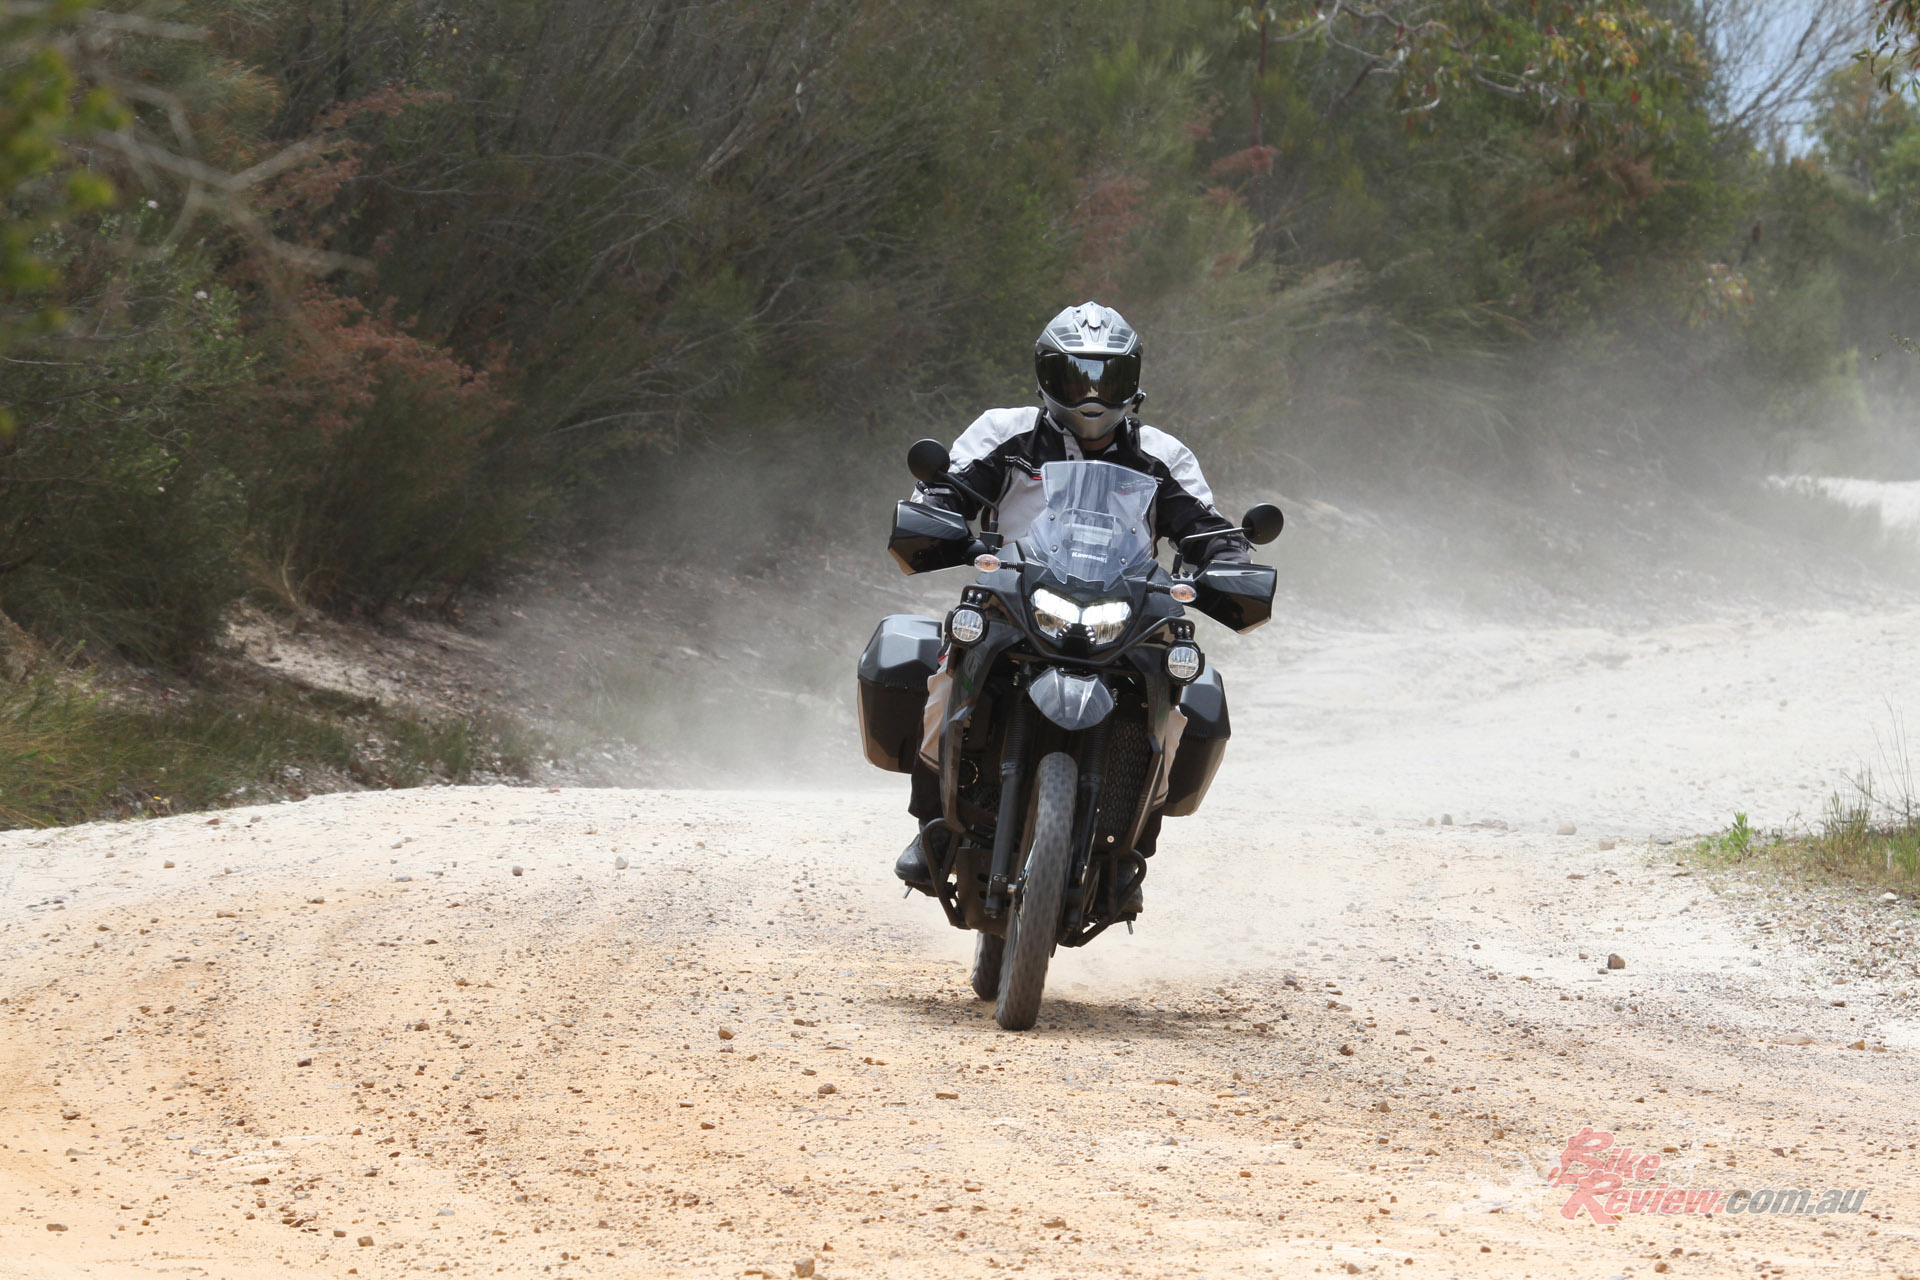 "The revised engine is a charmer. With really tall gearing, the KLR will happily chug along at 110km/h all day."